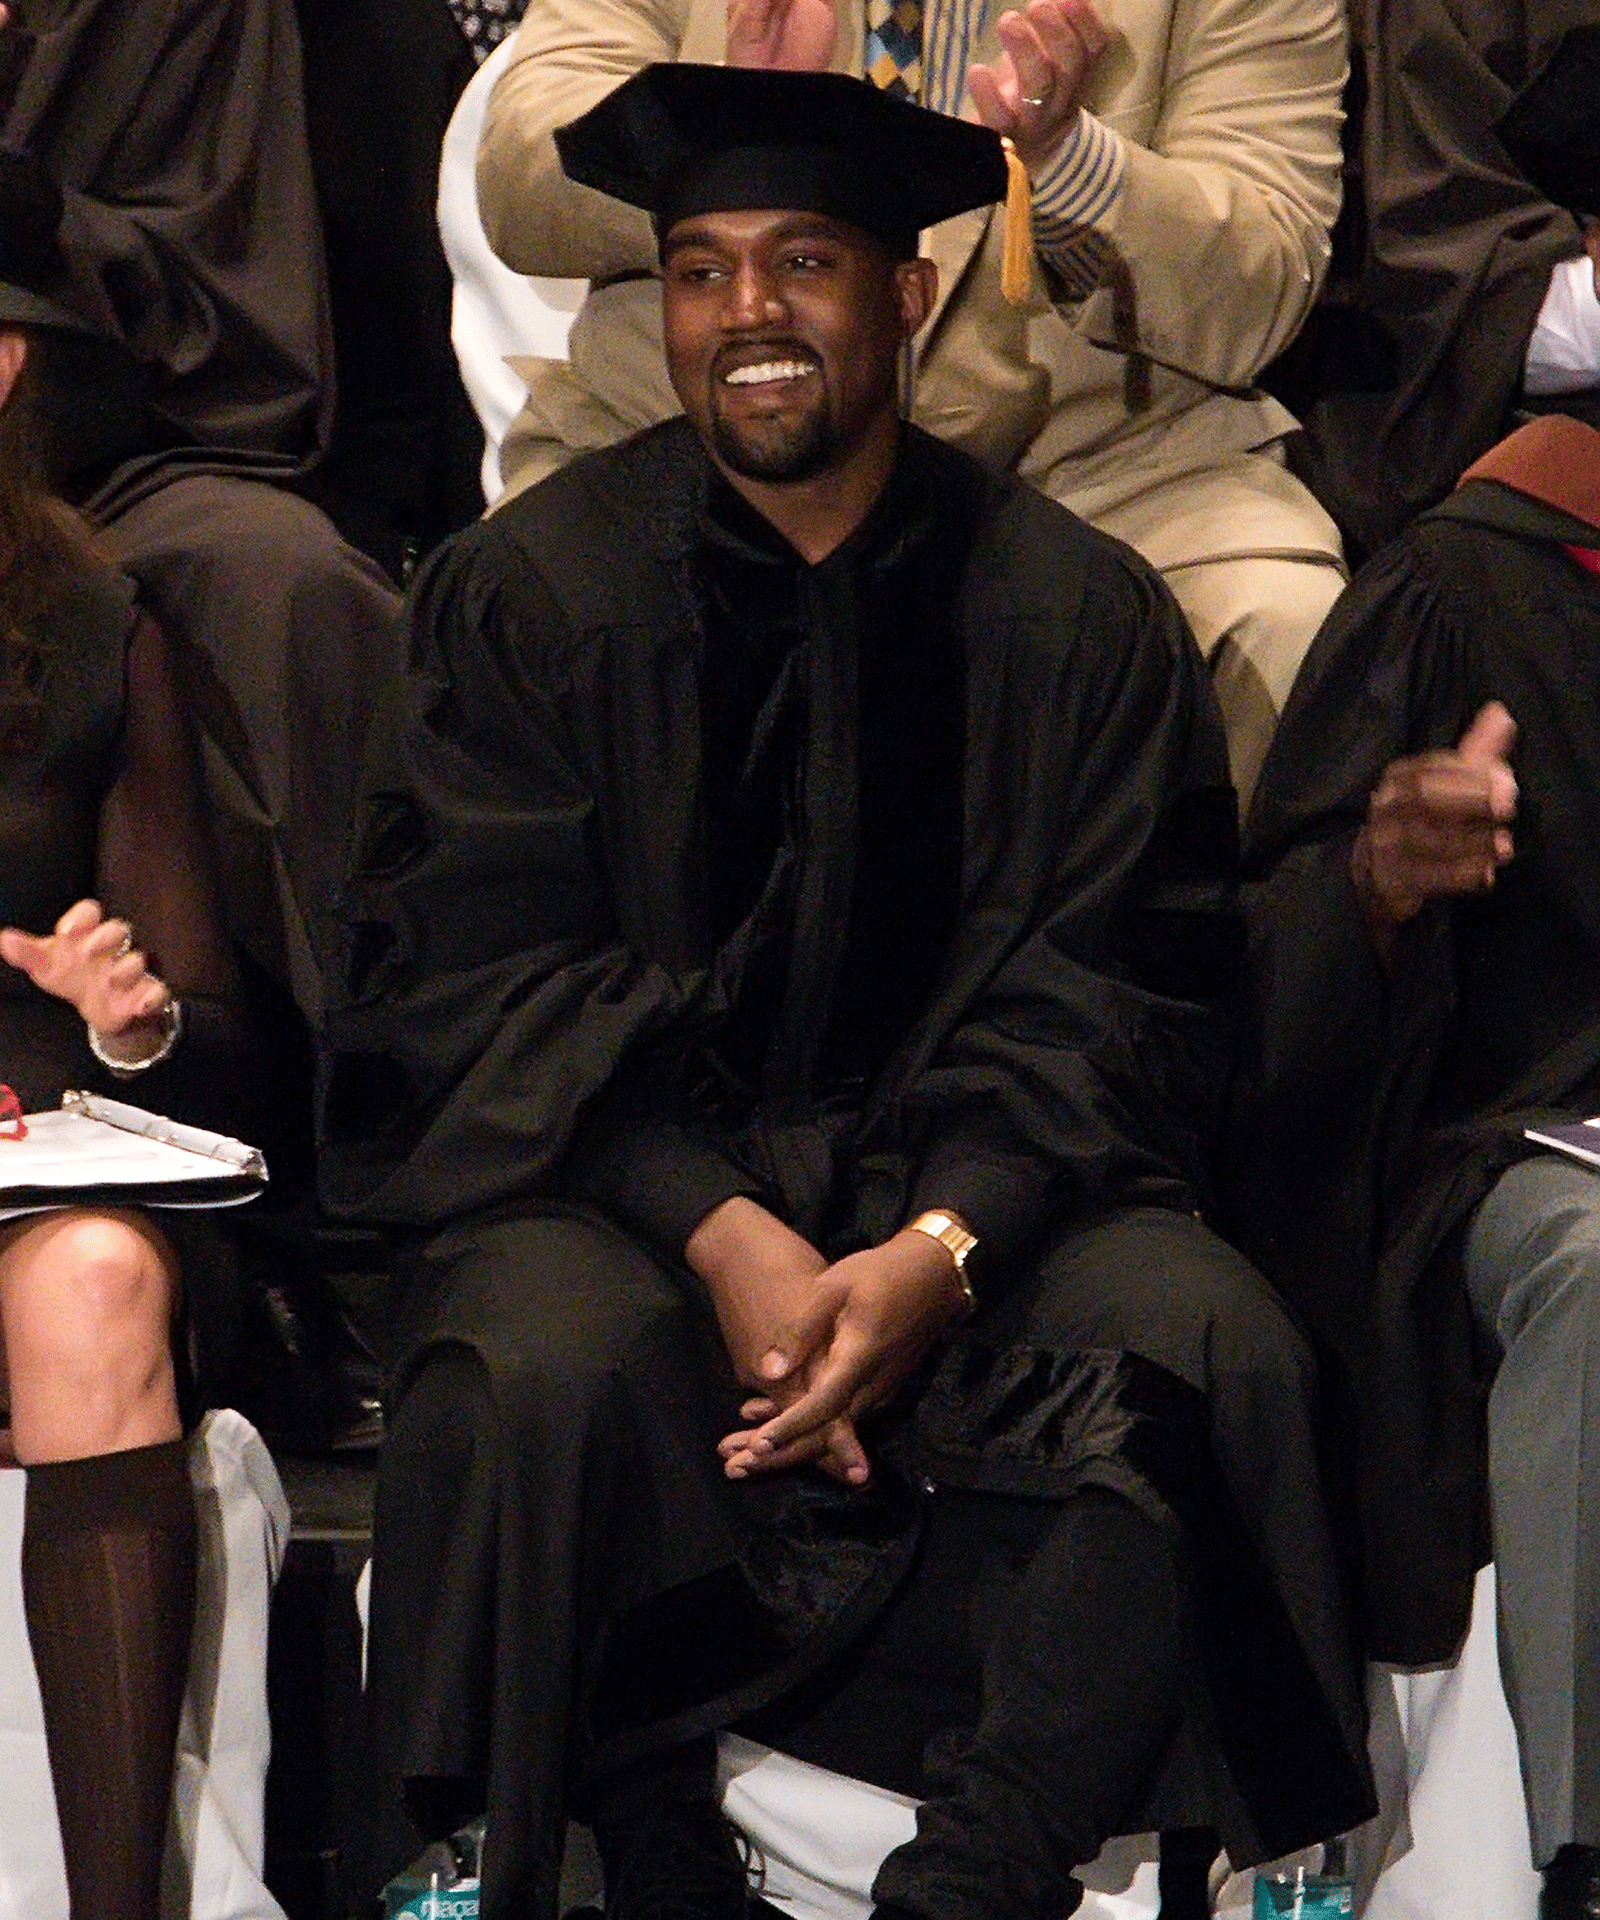 Talk about a busy weekend! Kanye West became a doctor, spoiled Kim Kardashian for Mother’s Day and starred in a viral video